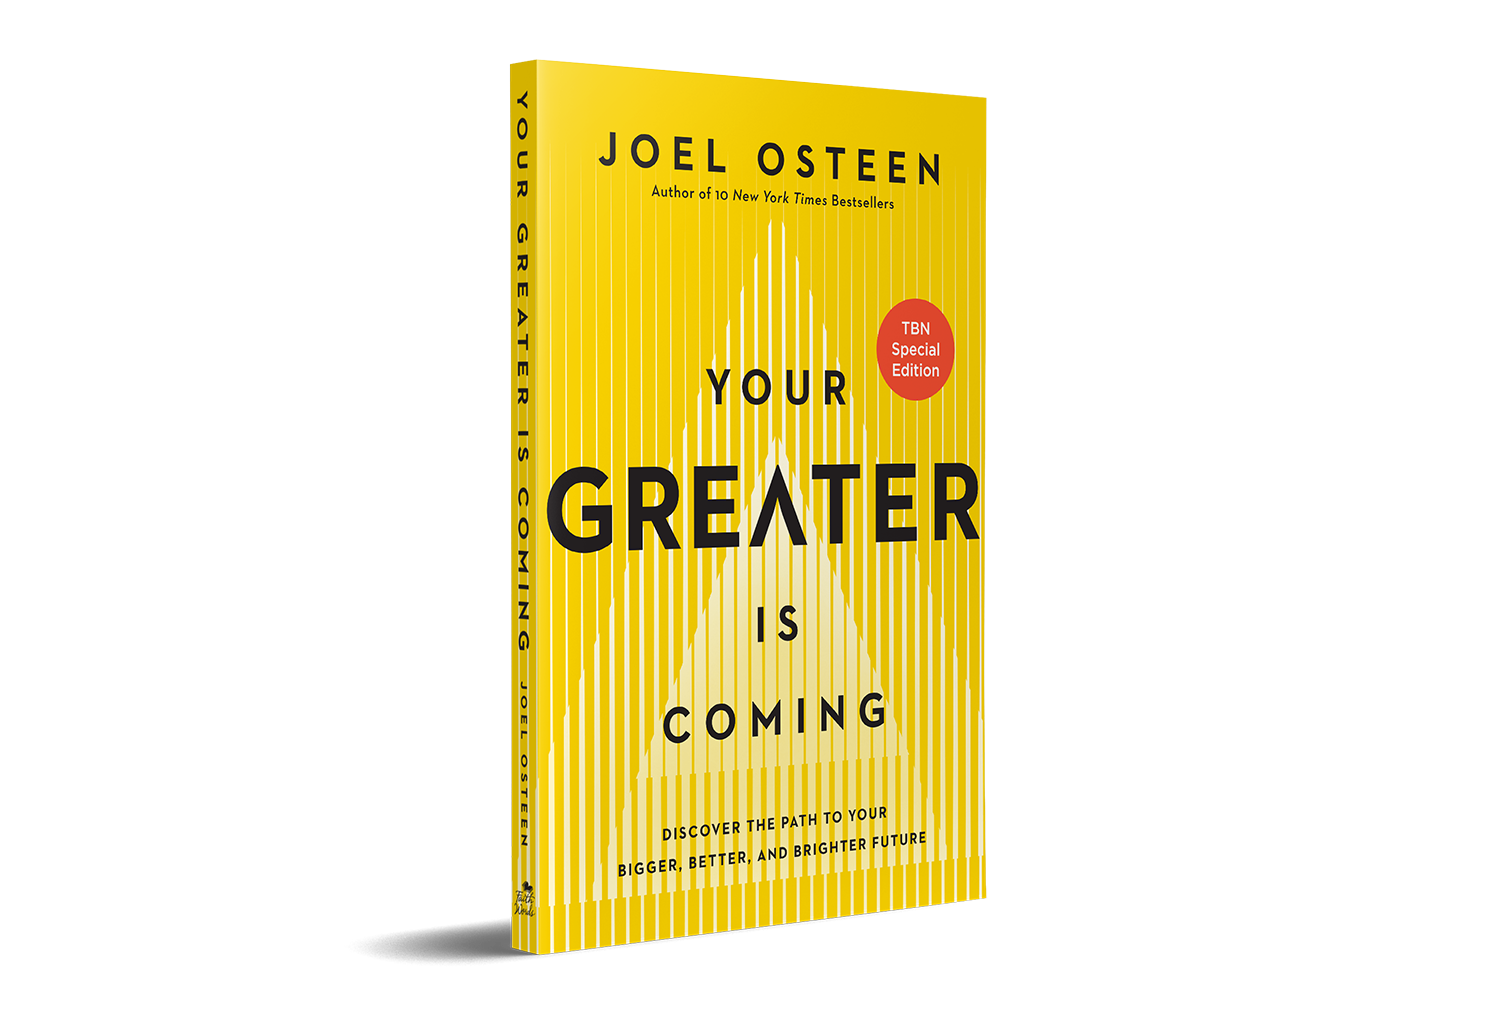 Receive Your Greater Is Coming by Joel Osteen from TBN